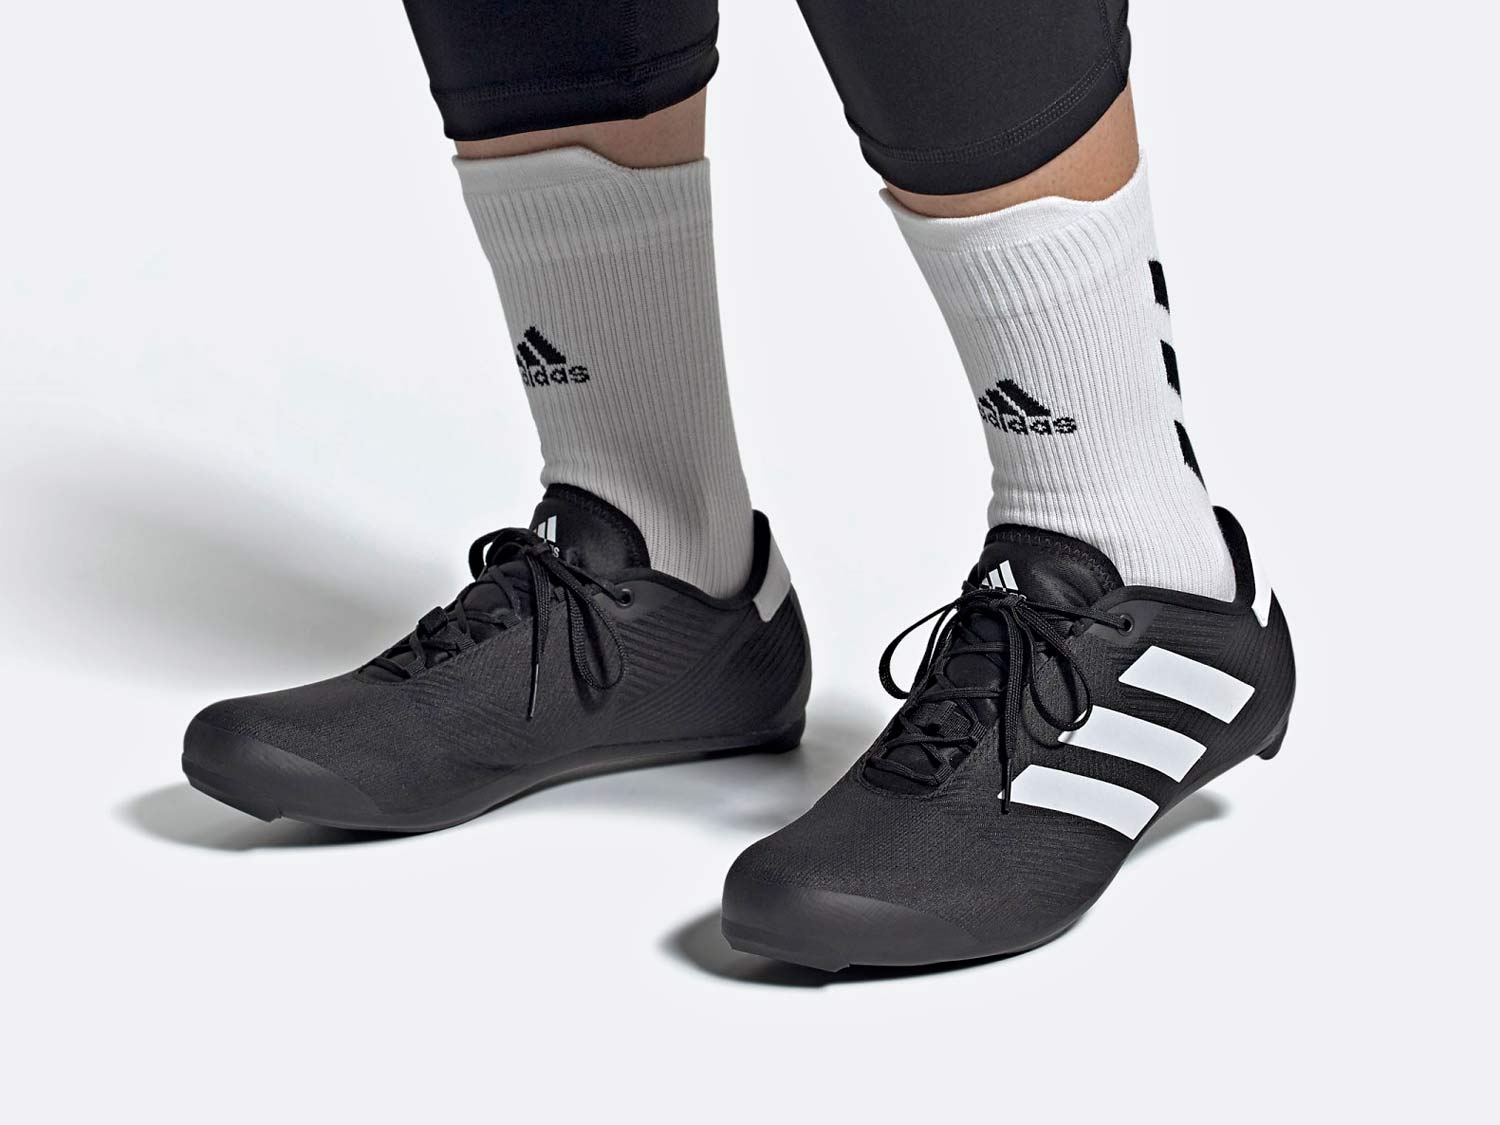 Adidas The Road Cycling Shoes, all-new mid-price lace-up soccer football style road bike shoe, 